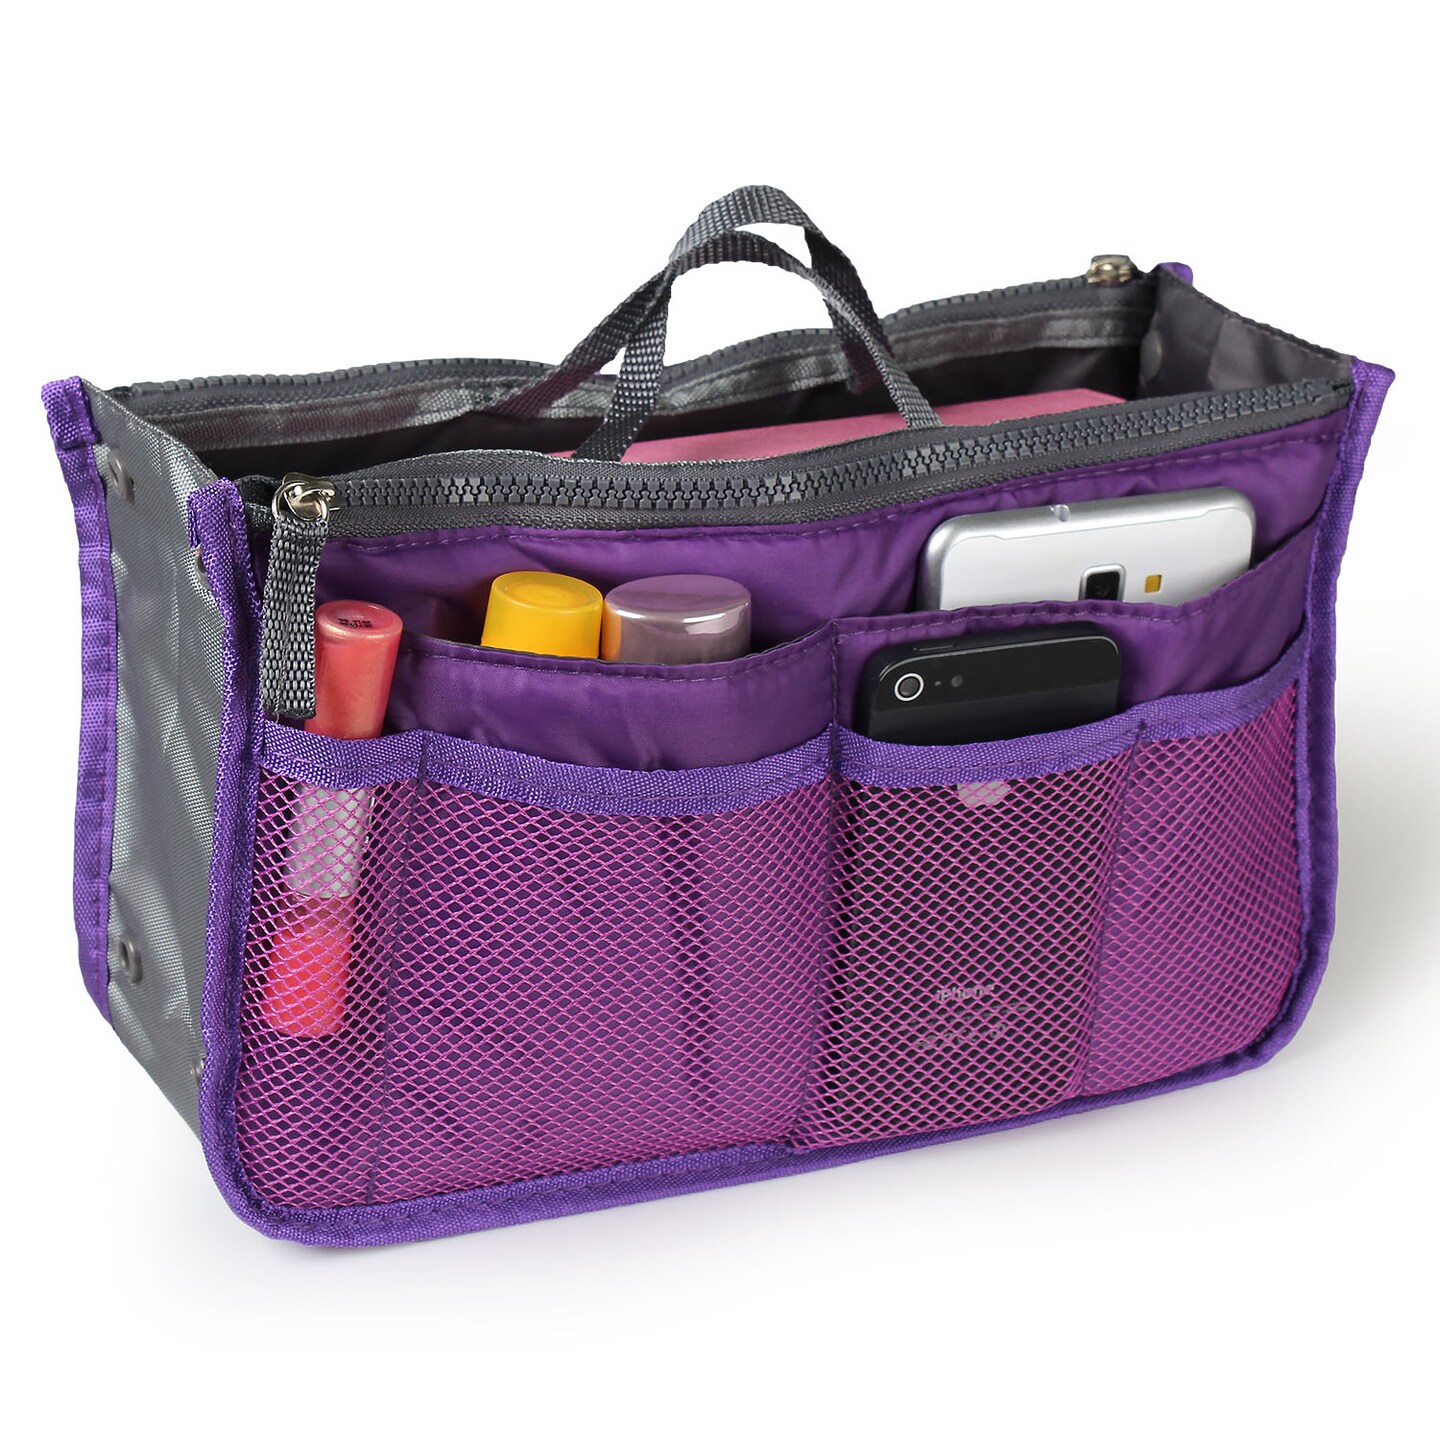 Cuyana Tote Organization Insert, Bag Organizer with Laptop Compartment -  Zepmade